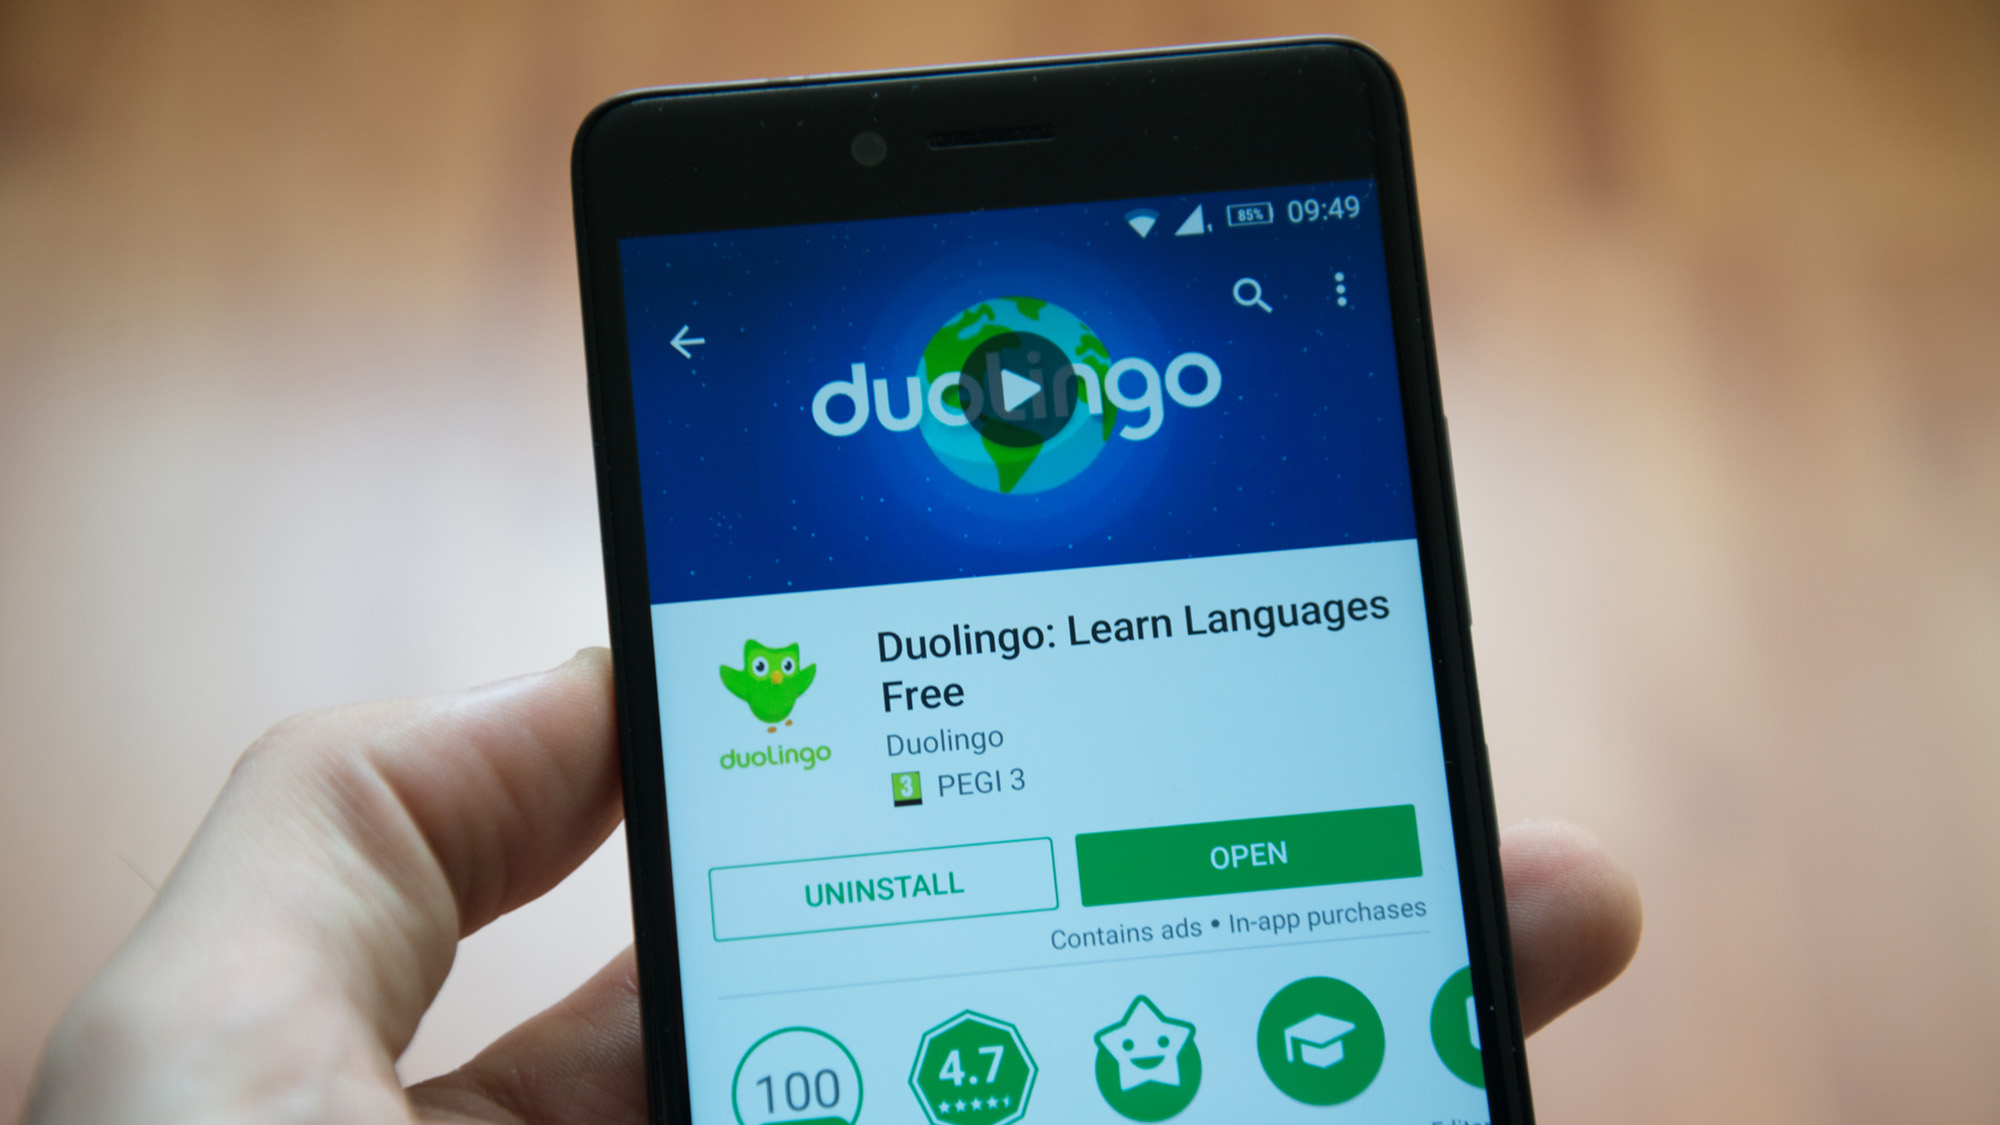 The best free language learning apps for building your vocabulary and conversational skills